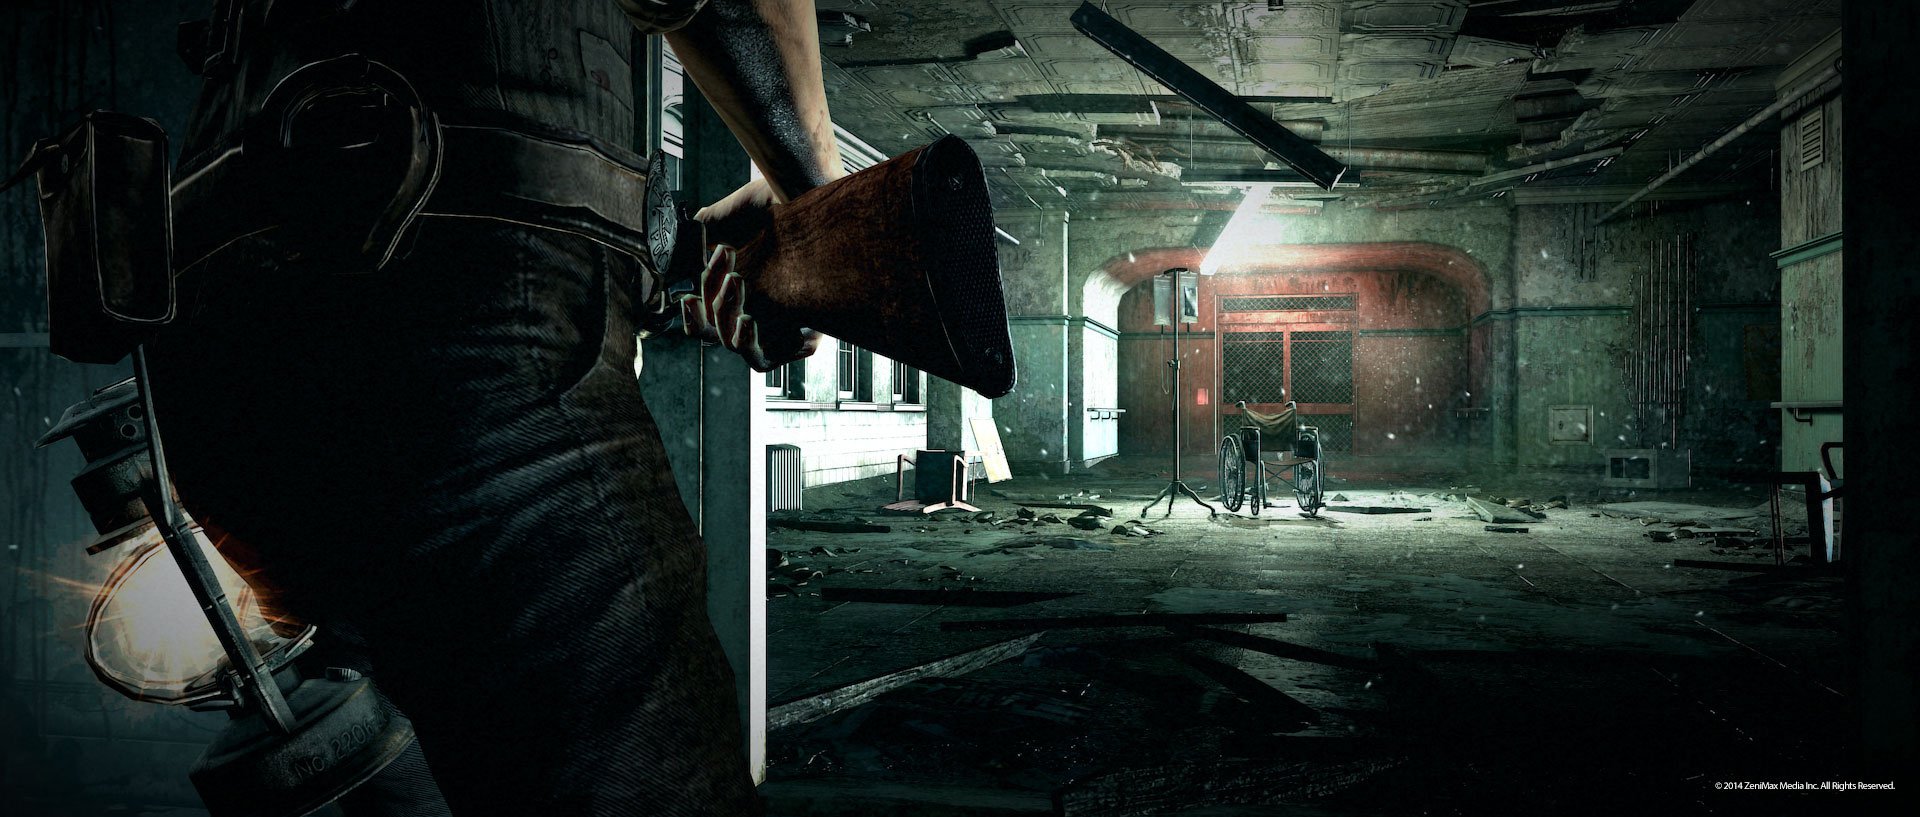 The Evil Within (PS4 / PlayStation 4) Game Profile News